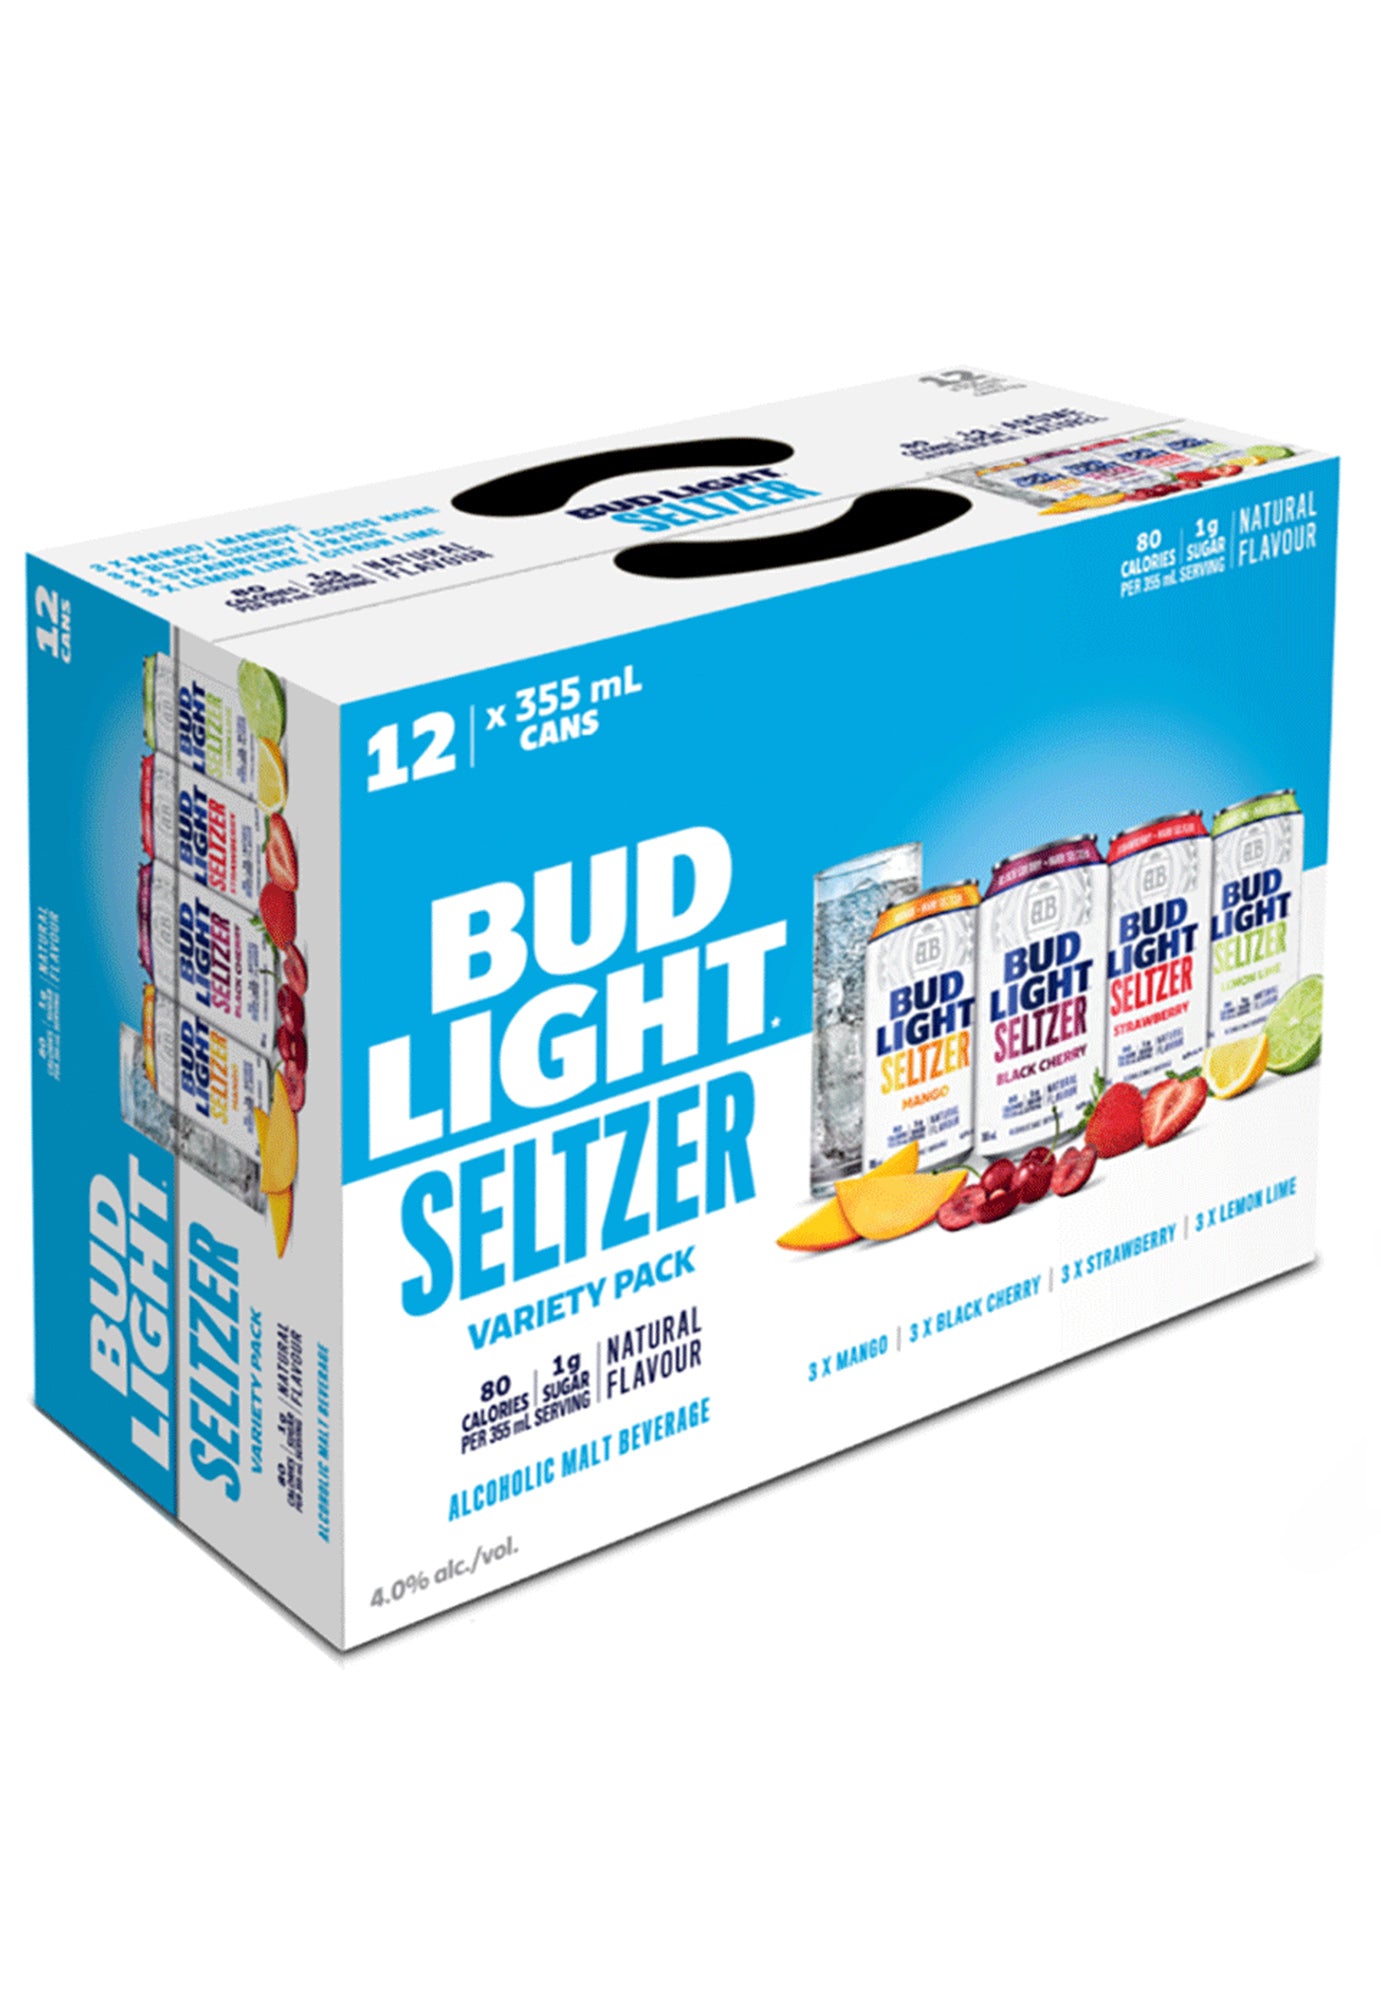 Bud Light Seltzer Variety Pack 355 ml - 12 Cans